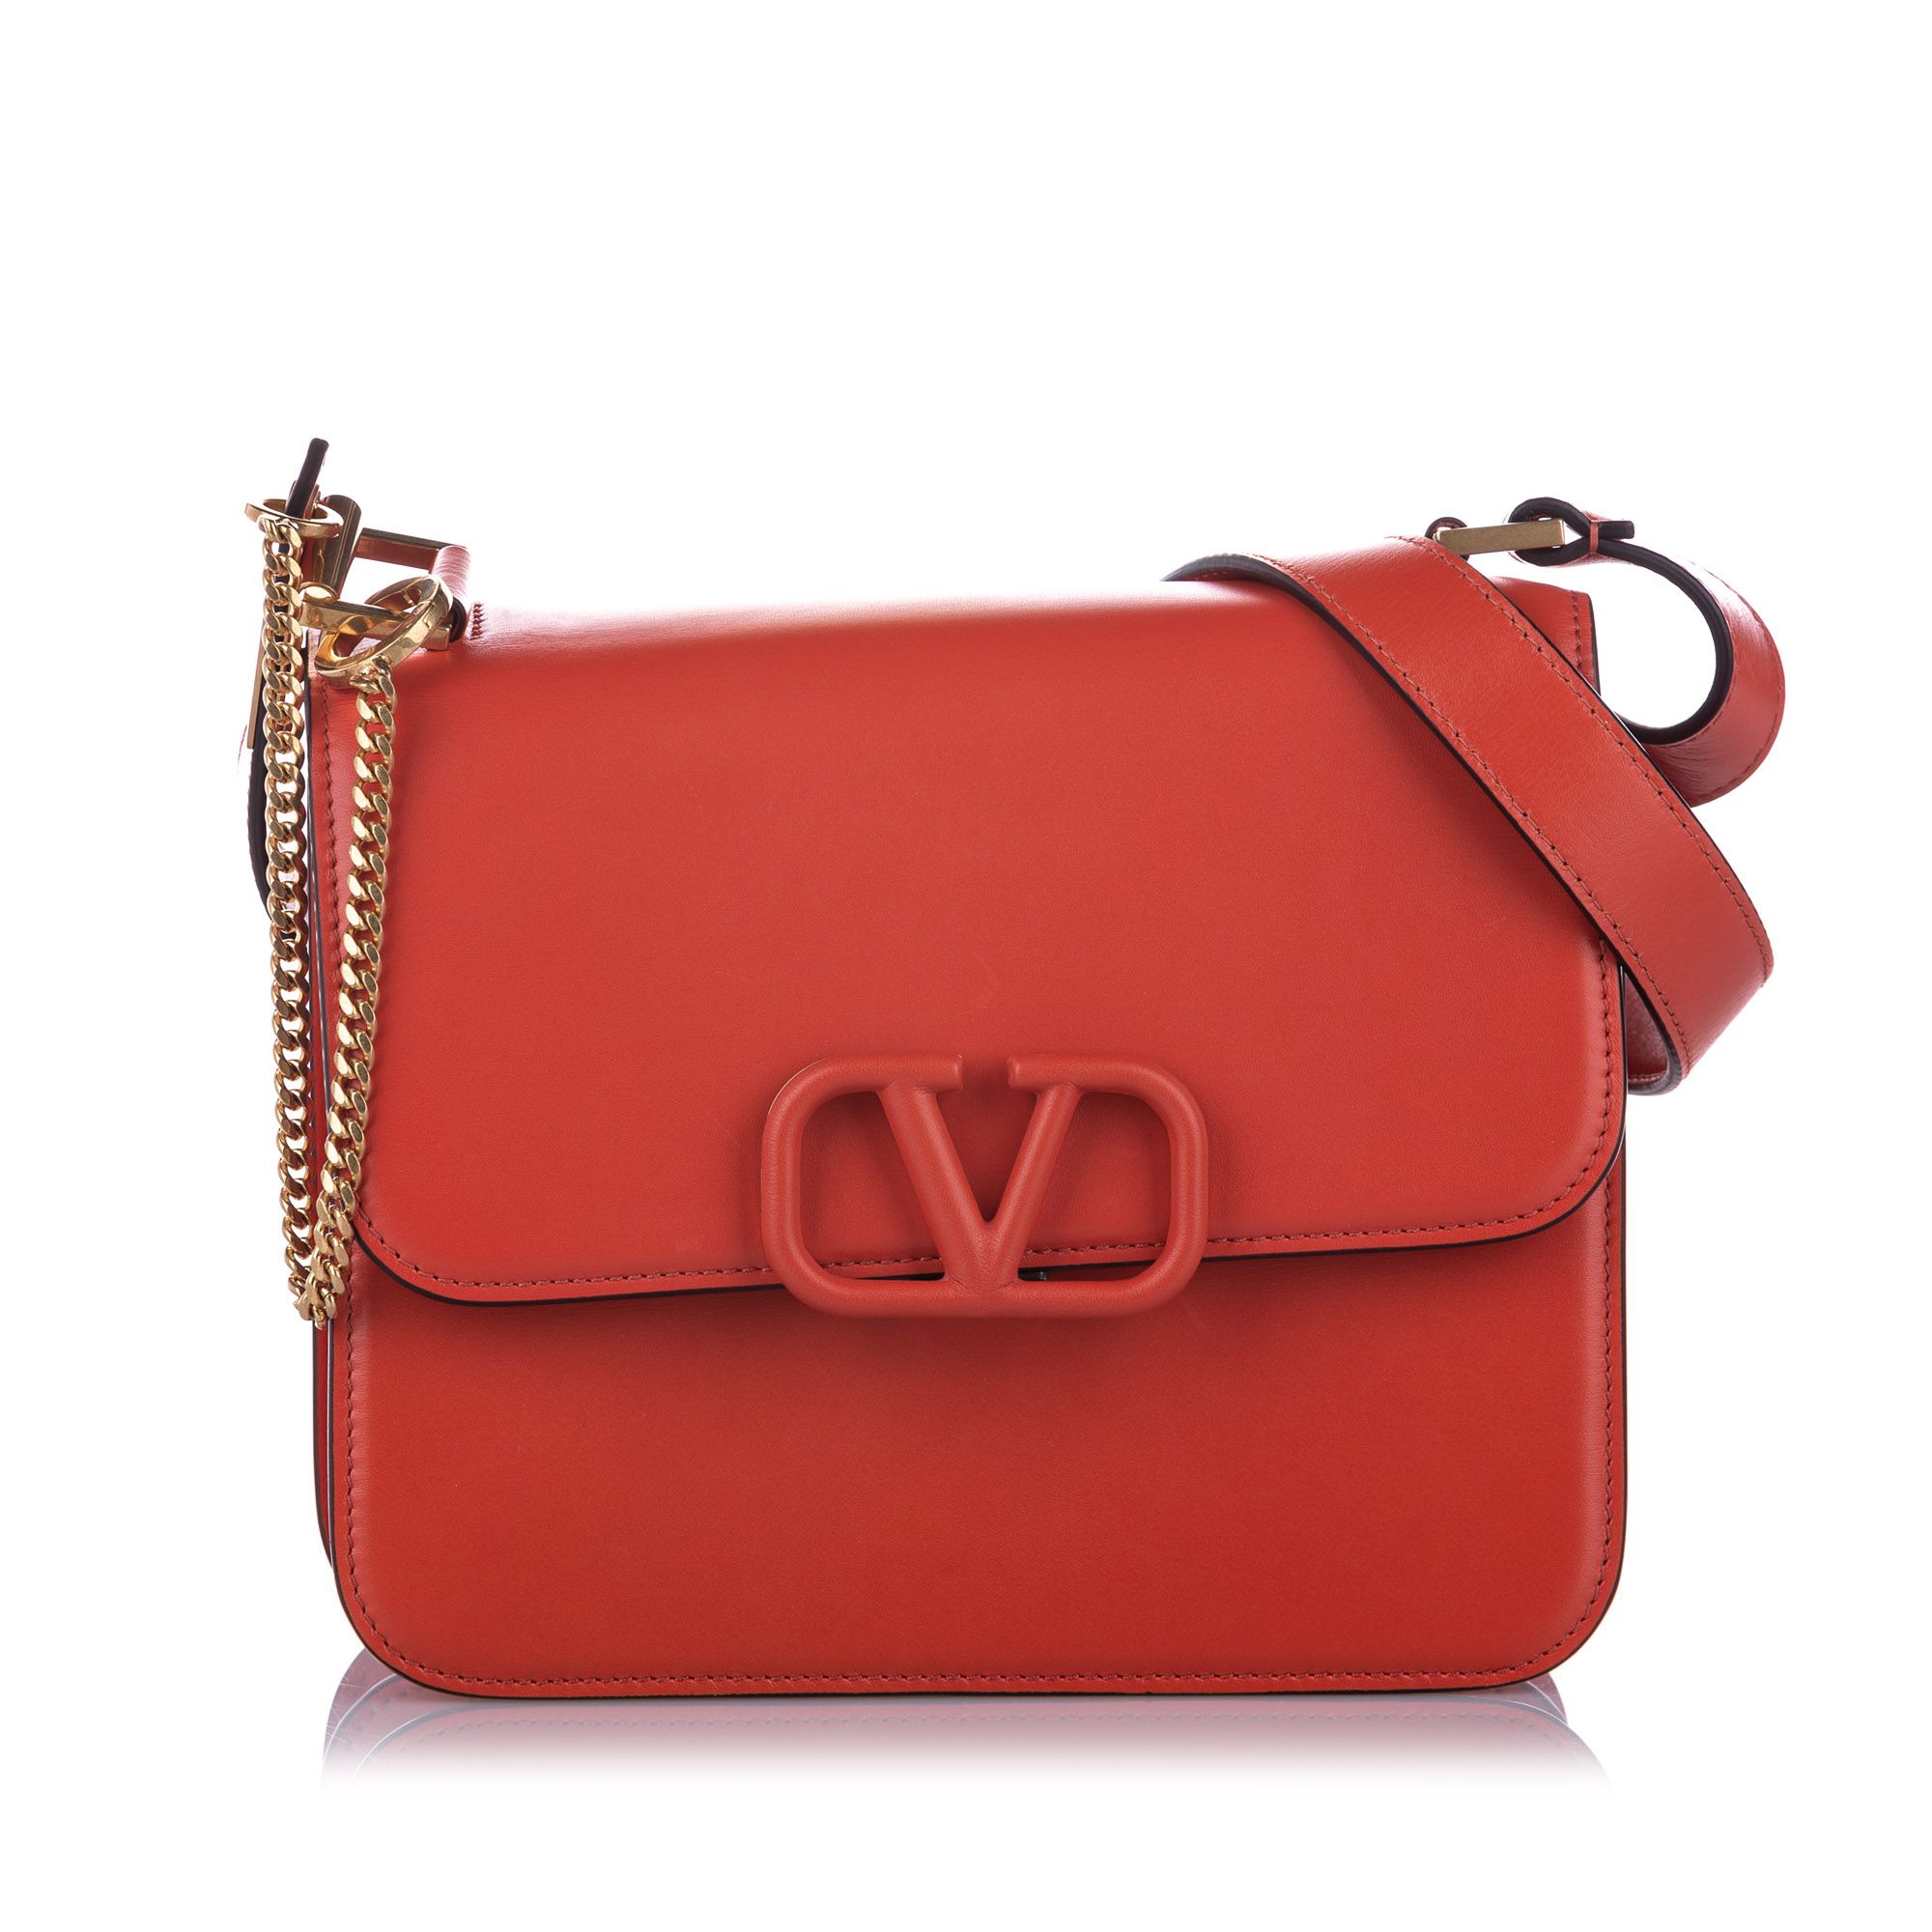 VINTAGE. RRP AS NEW. The V Sling crossbody features a leather body, a flat leather with chain strap, a front flap with a magnetic snap button closure, and interior zip and slip pockets.Exterior front is scratched.

Dimensions:
Length 18cm
Width 23cm
Depth 13cm
Shoulder Drop 52cm

Original Accessories: Dust Bag

Color: Red x Gold
Material: Leather x Calf x Metal x Brass
Country of Origin: ITALY
Boutique Reference: SSU84209K1342


Product Rating: GoodCondition